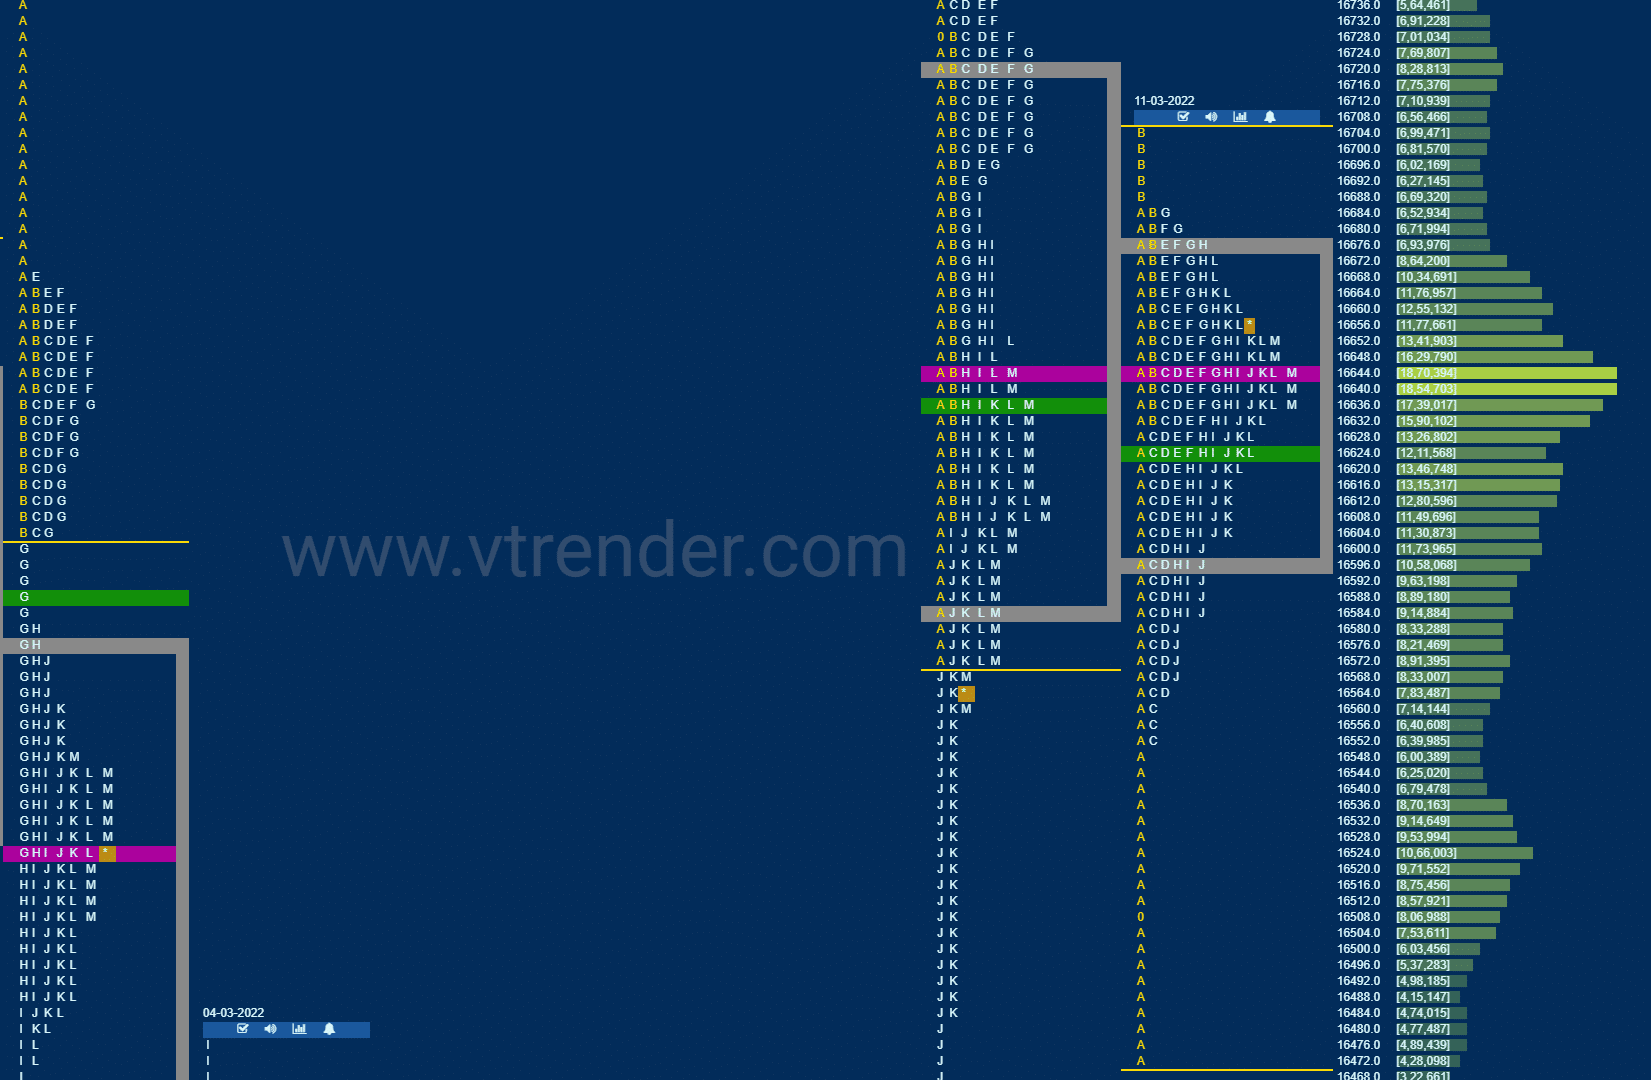 Nf 8 Market Profile Analysis Dated 11Th March 2022 Banknifty Futures, Charts, Day Trading, Intraday Trading, Intraday Trading Strategies, Market Profile, Market Profile Trading Strategies, Nifty Futures, Order Flow Analysis, Support And Resistance, Technical Analysis, Trading Strategies, Volume Profile Trading